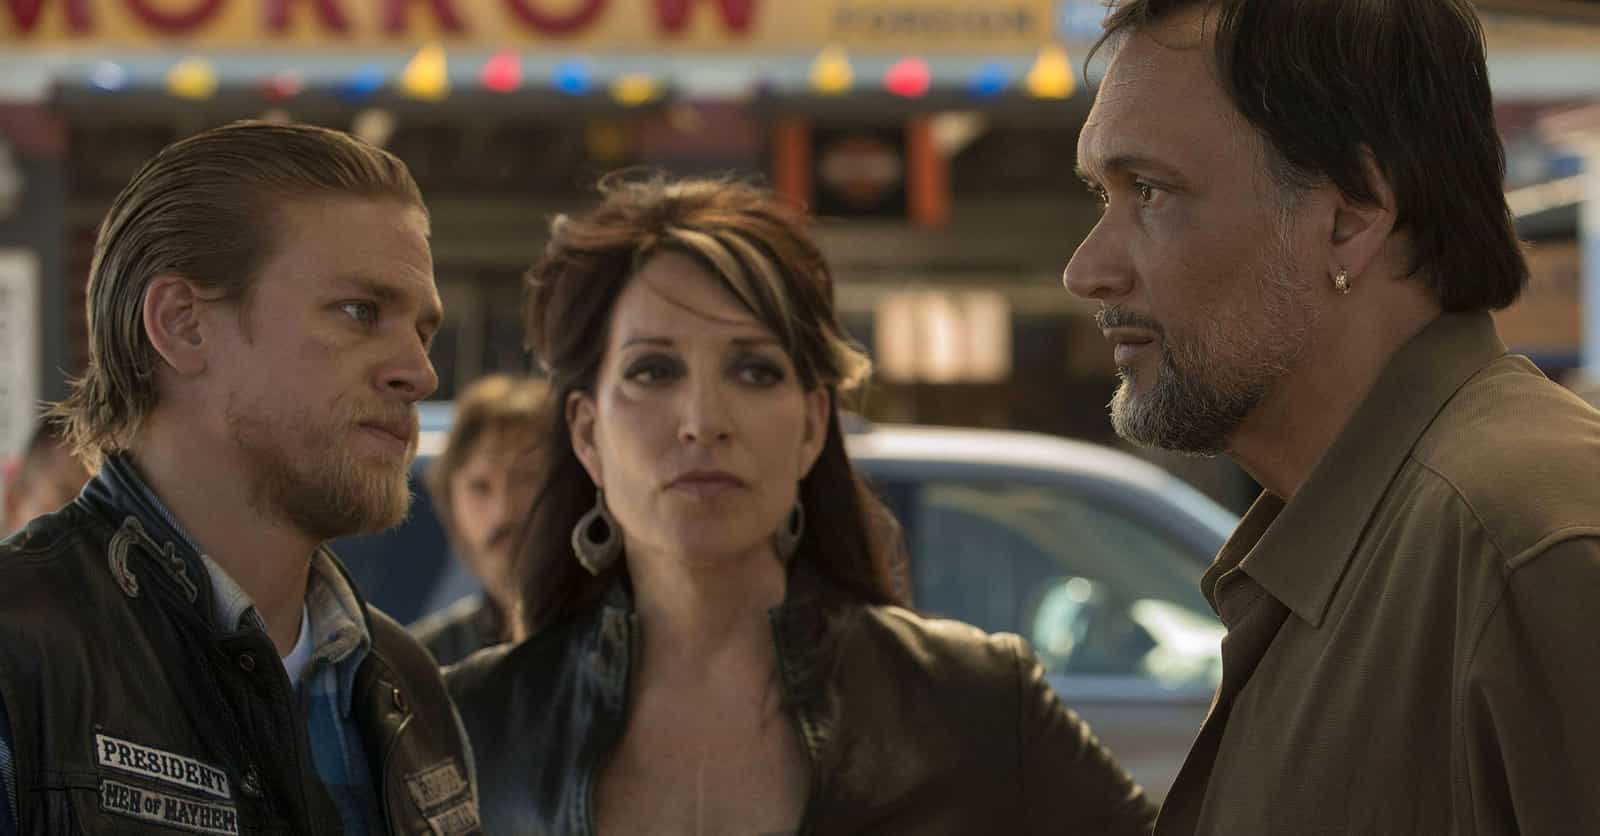 How the Cast of Sons of Anarchy Aged from the First to Last Season